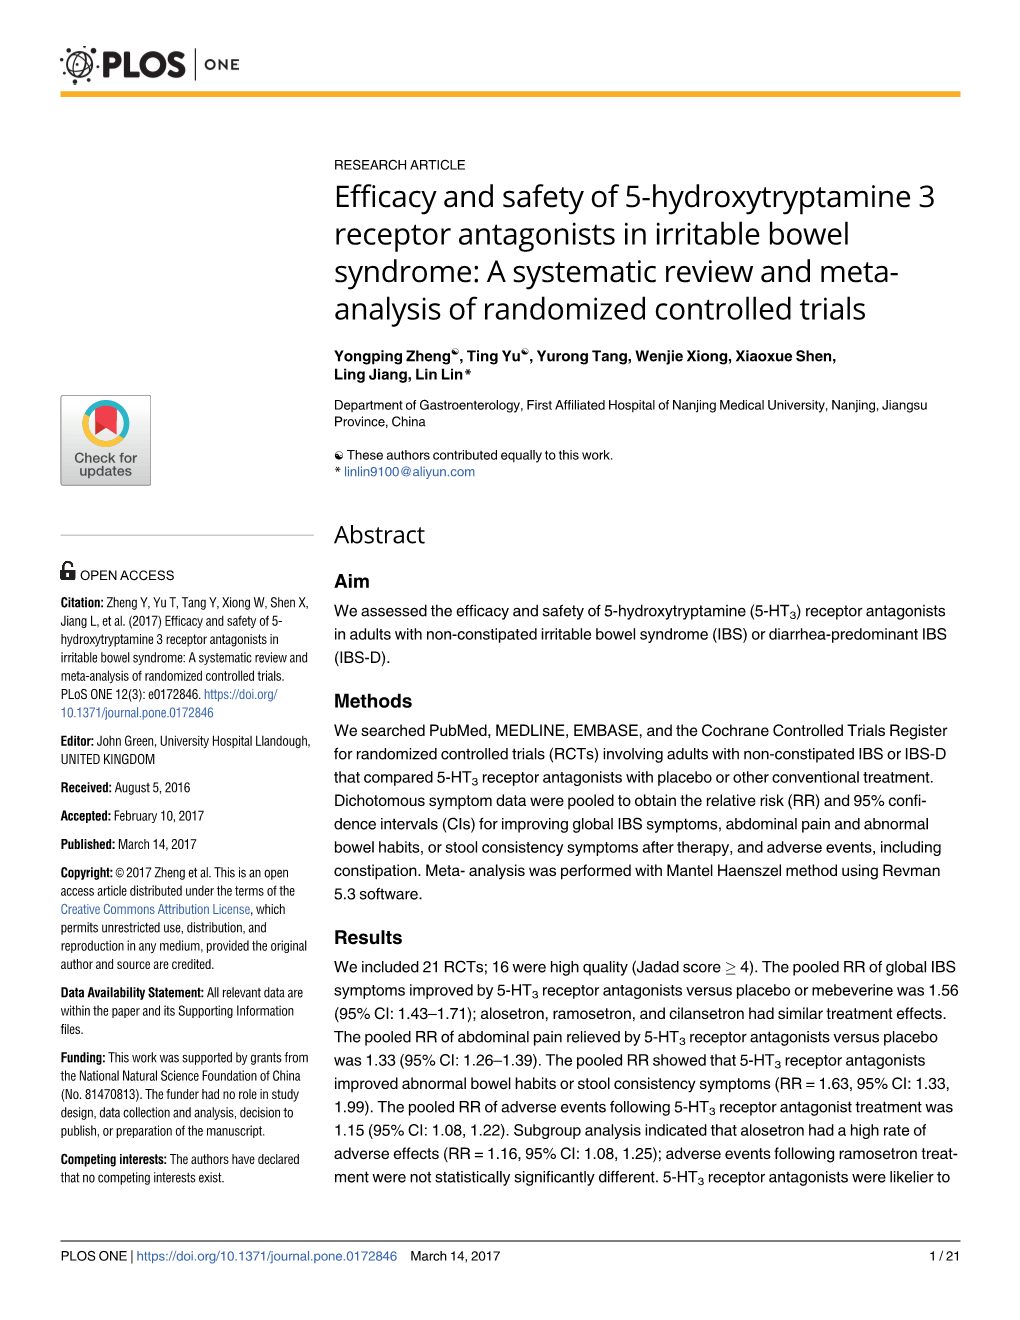 Efficacy and Safety of 5-Hydroxytryptamine 3 Receptor Antagonists in Irritable Bowel Syndrome: a Systematic Review and Meta- Analysis of Randomized Controlled Trials